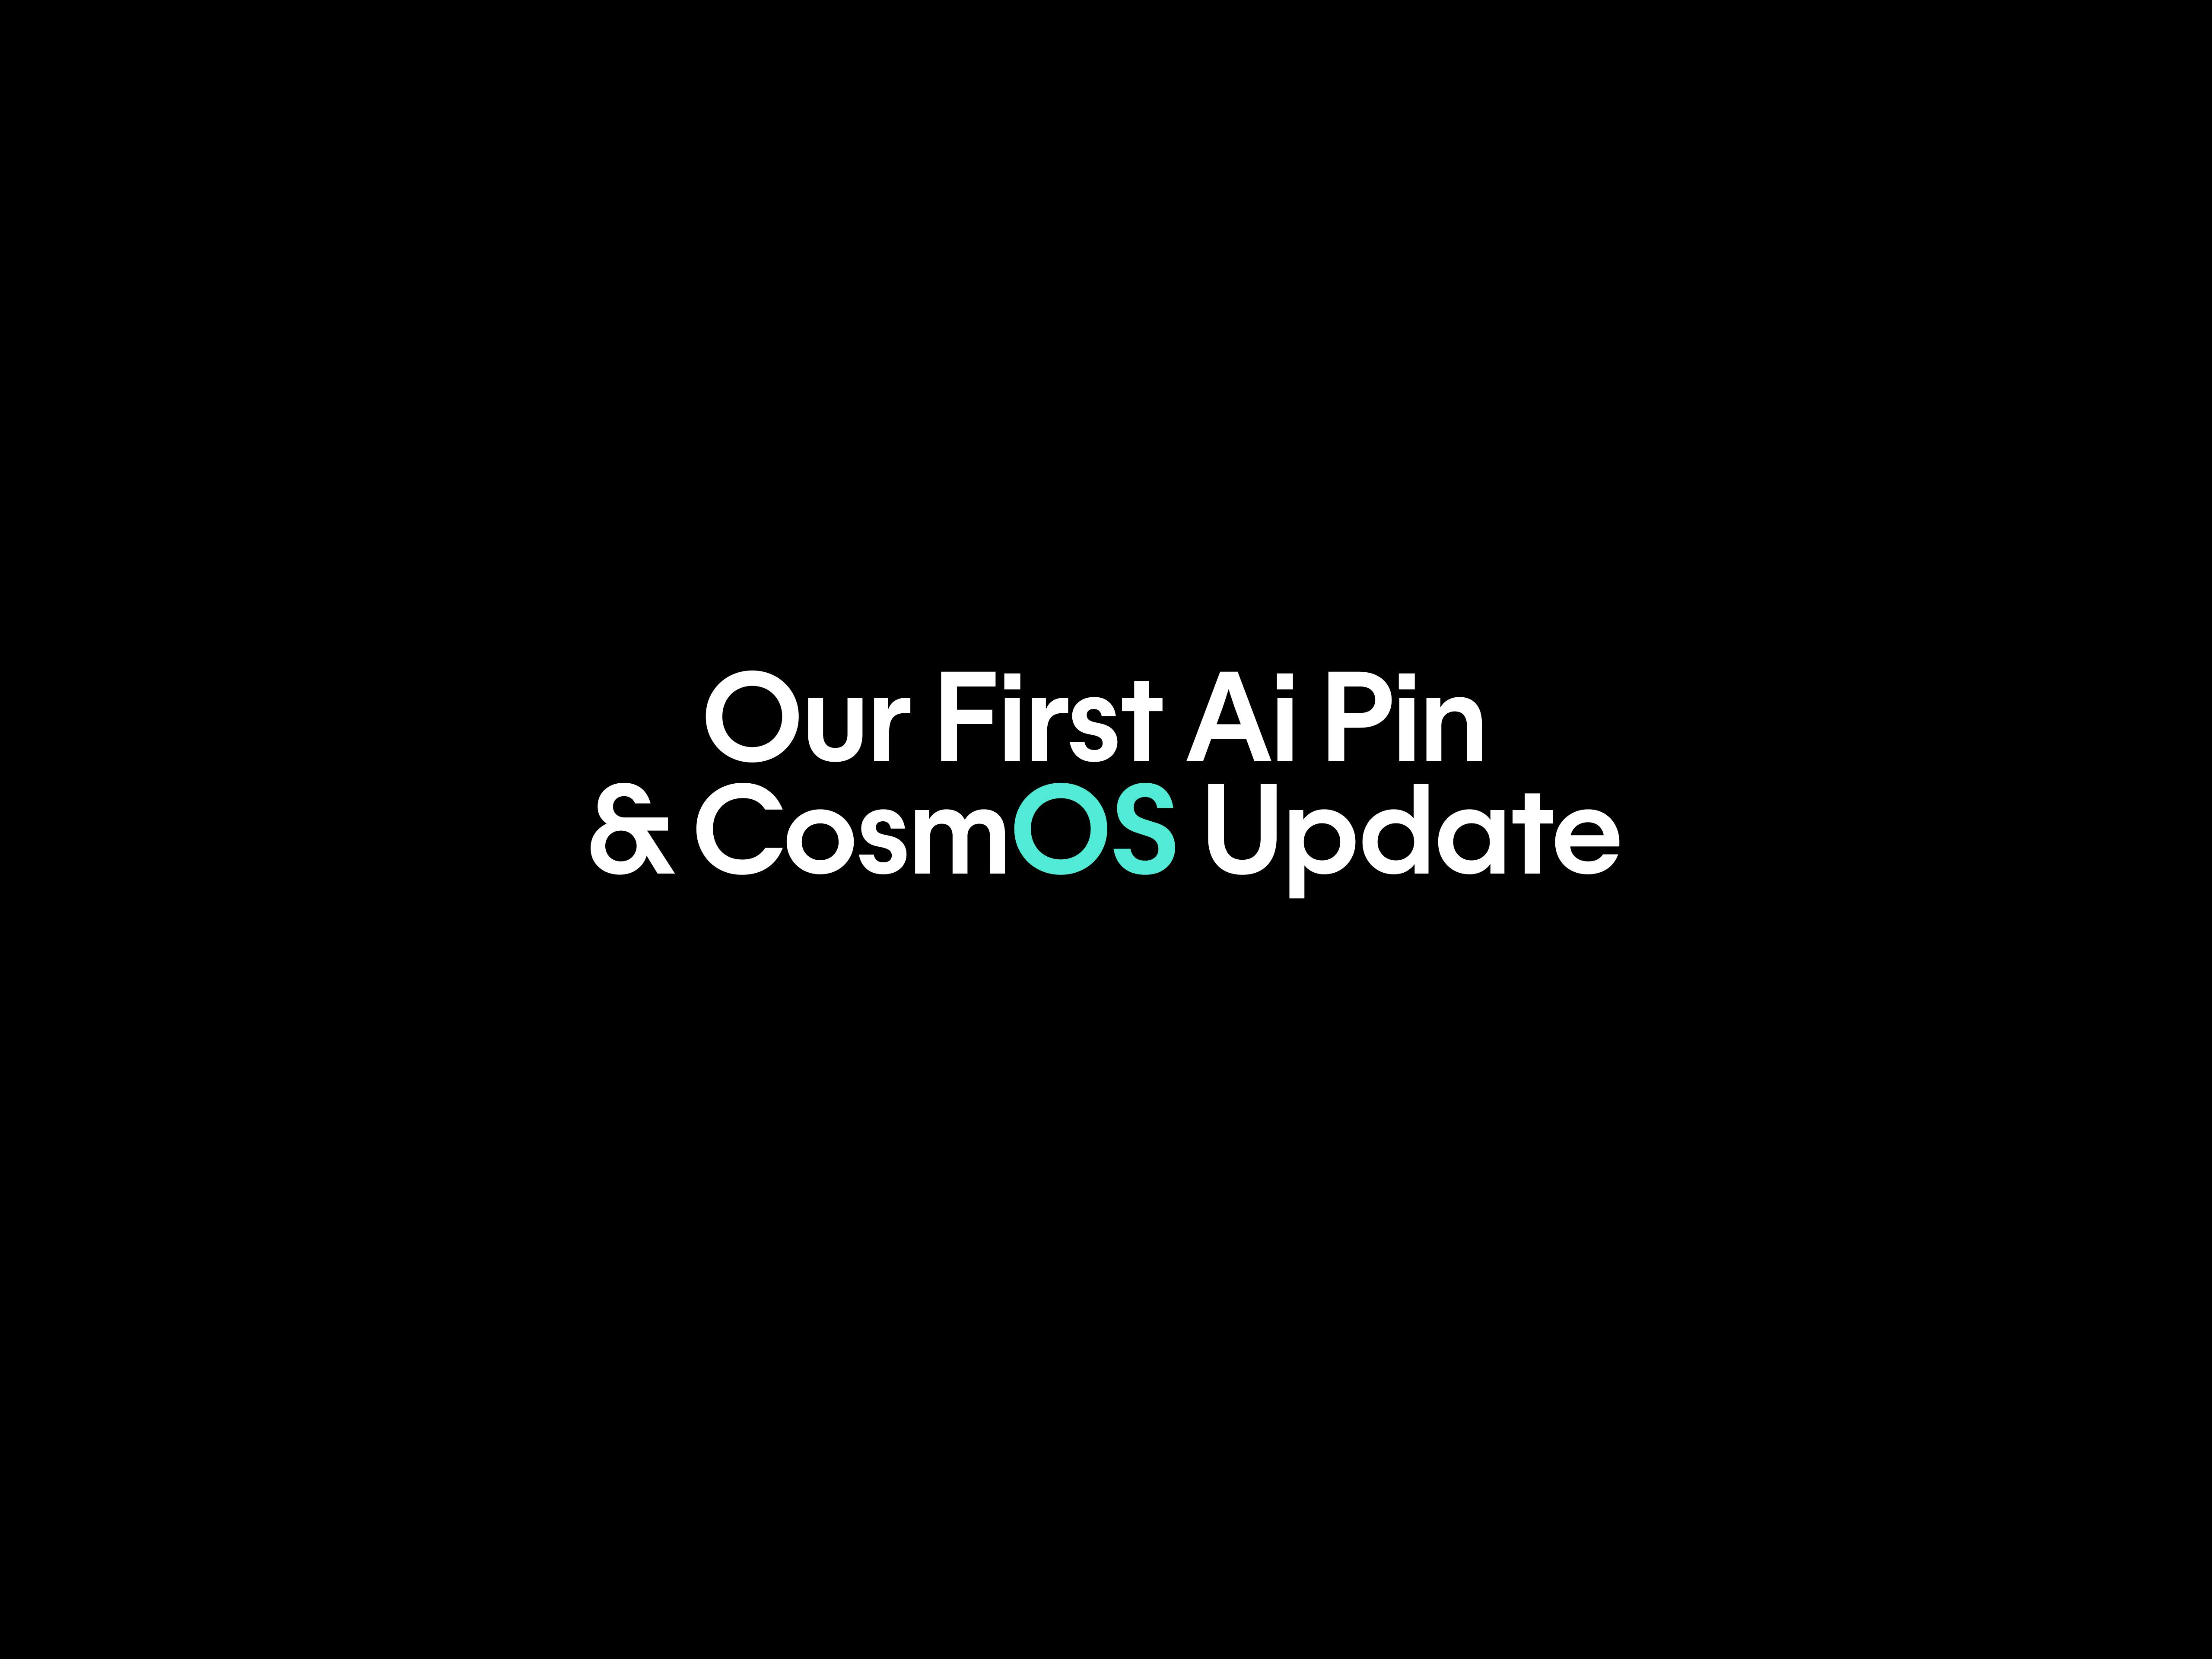 We’d like to thank every one of our early customers for sharing their first experiences with Ai Pin. All feedback is valuable, and we are working ra